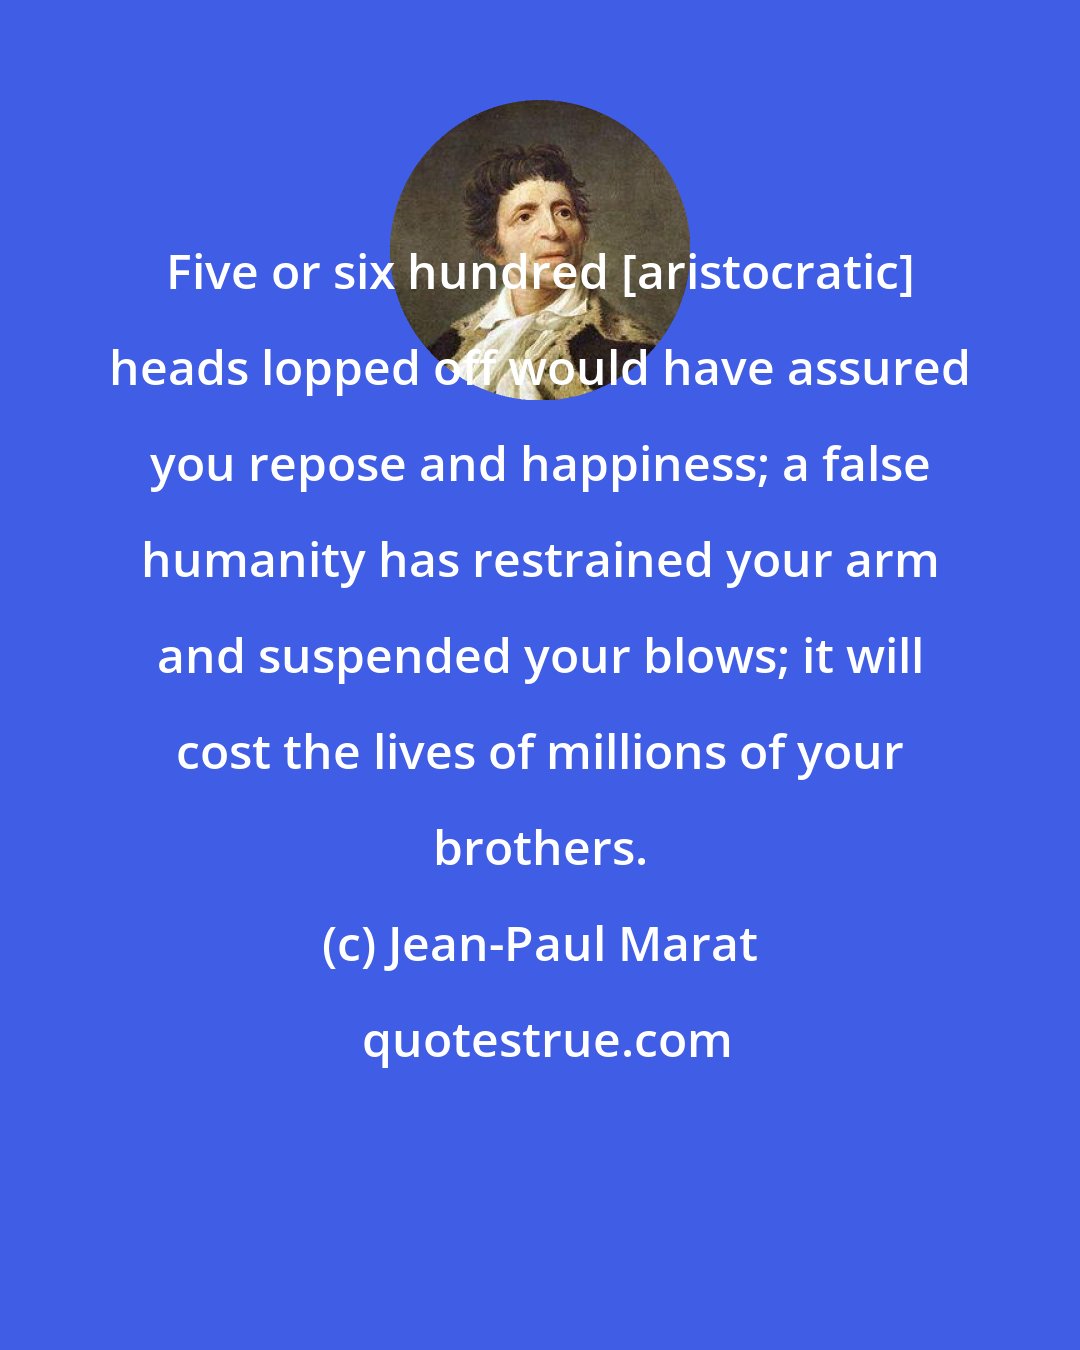 Jean-Paul Marat: Five or six hundred [aristocratic] heads lopped off would have assured you repose and happiness; a false humanity has restrained your arm and suspended your blows; it will cost the lives of millions of your brothers.